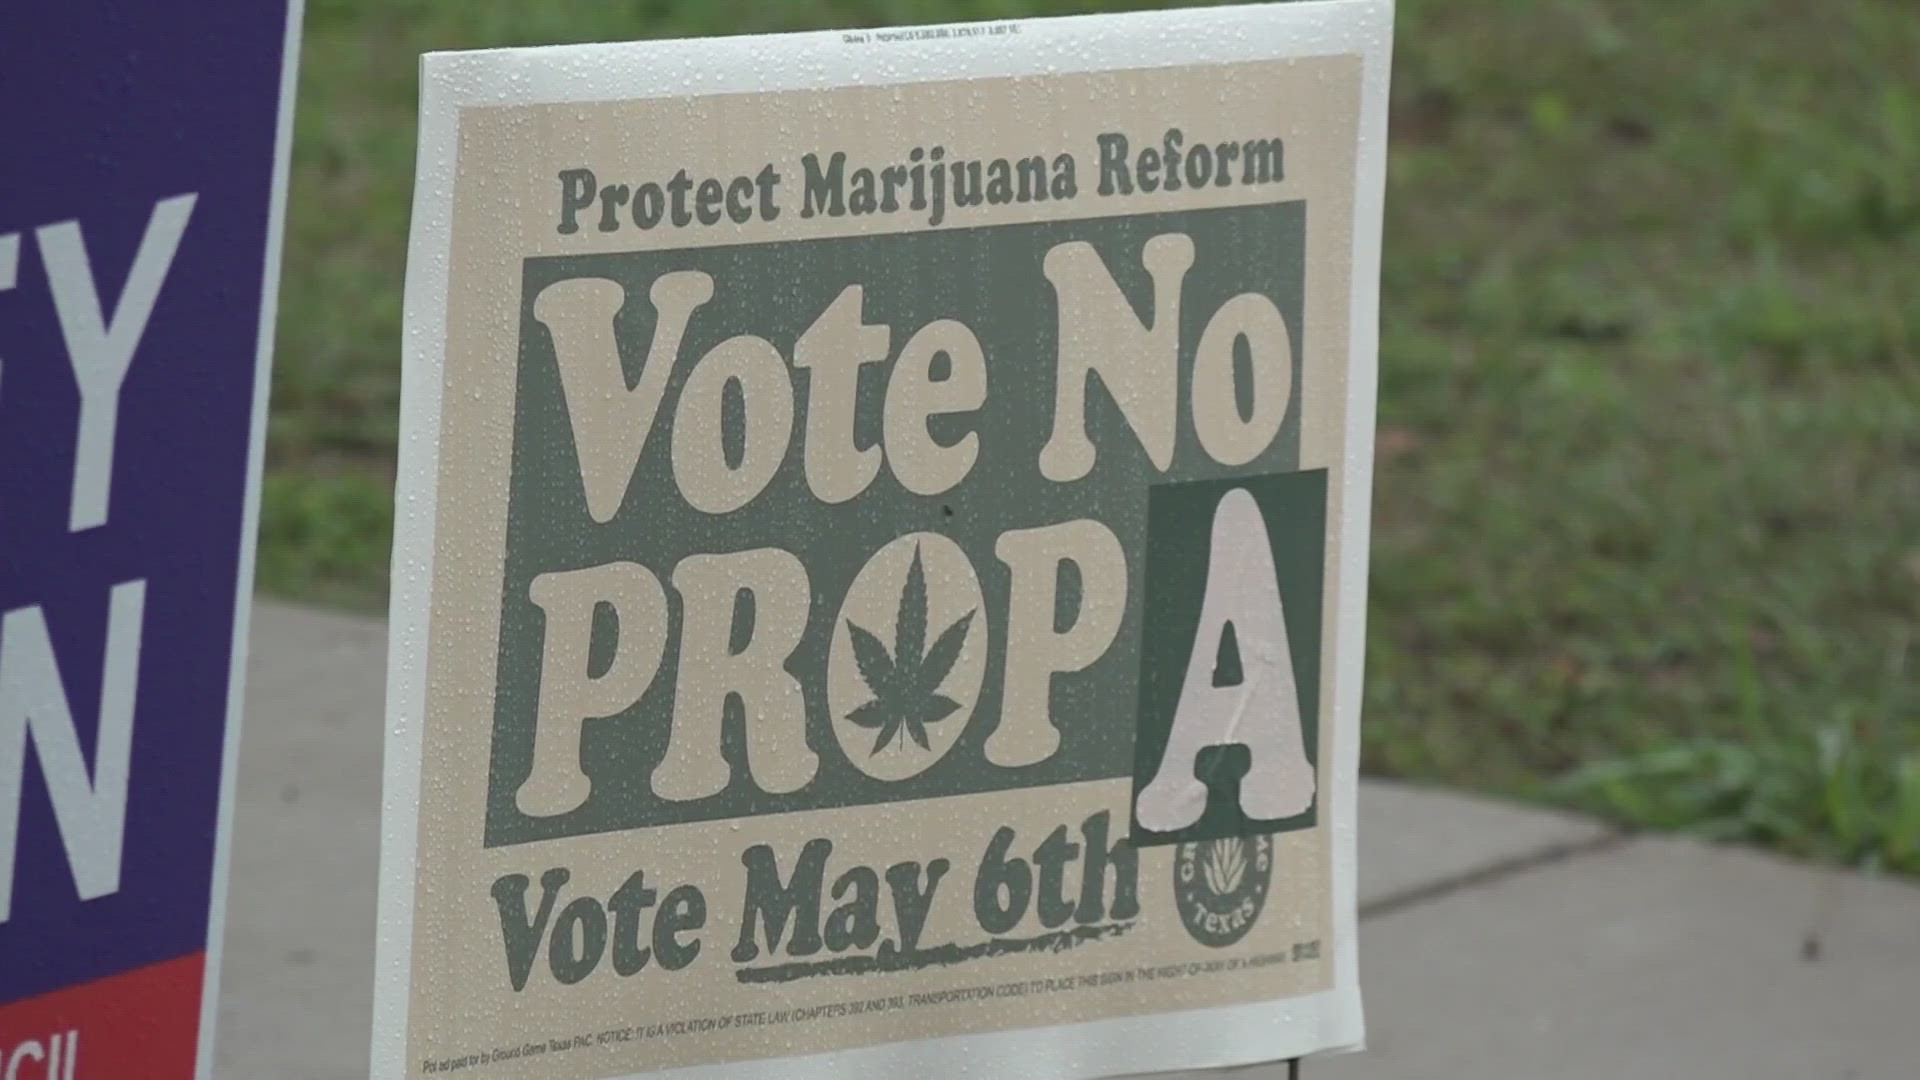 The marijuana ordinance had been approved by voters in the November elections, but the City Council later voted to overturn it.